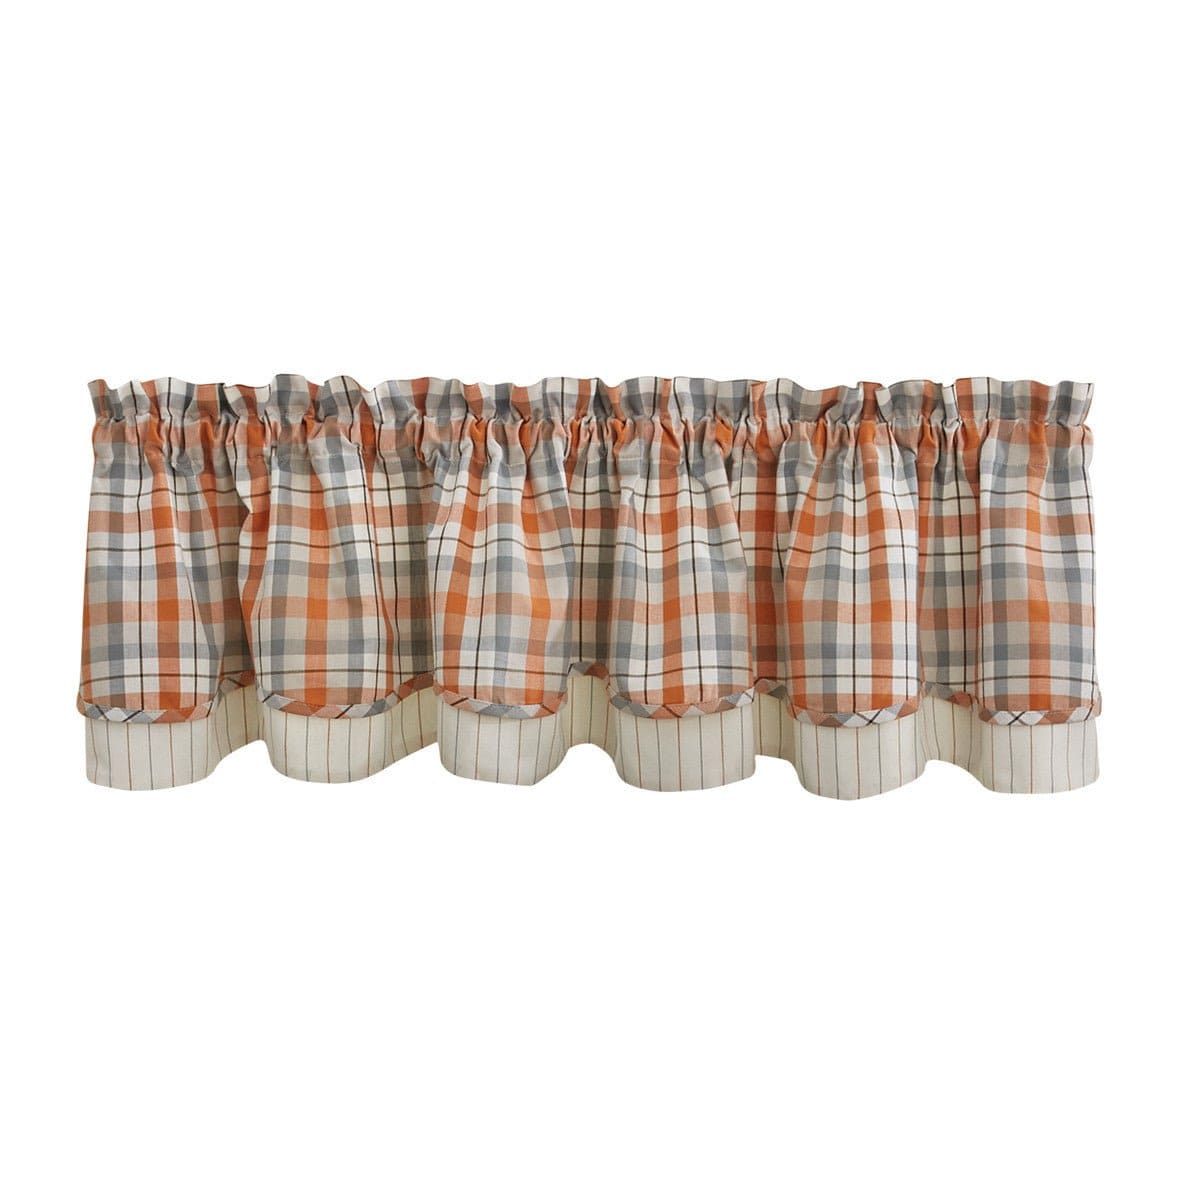 Apricot & Stone Layered Valance Lined-Park Designs-The Village Merchant